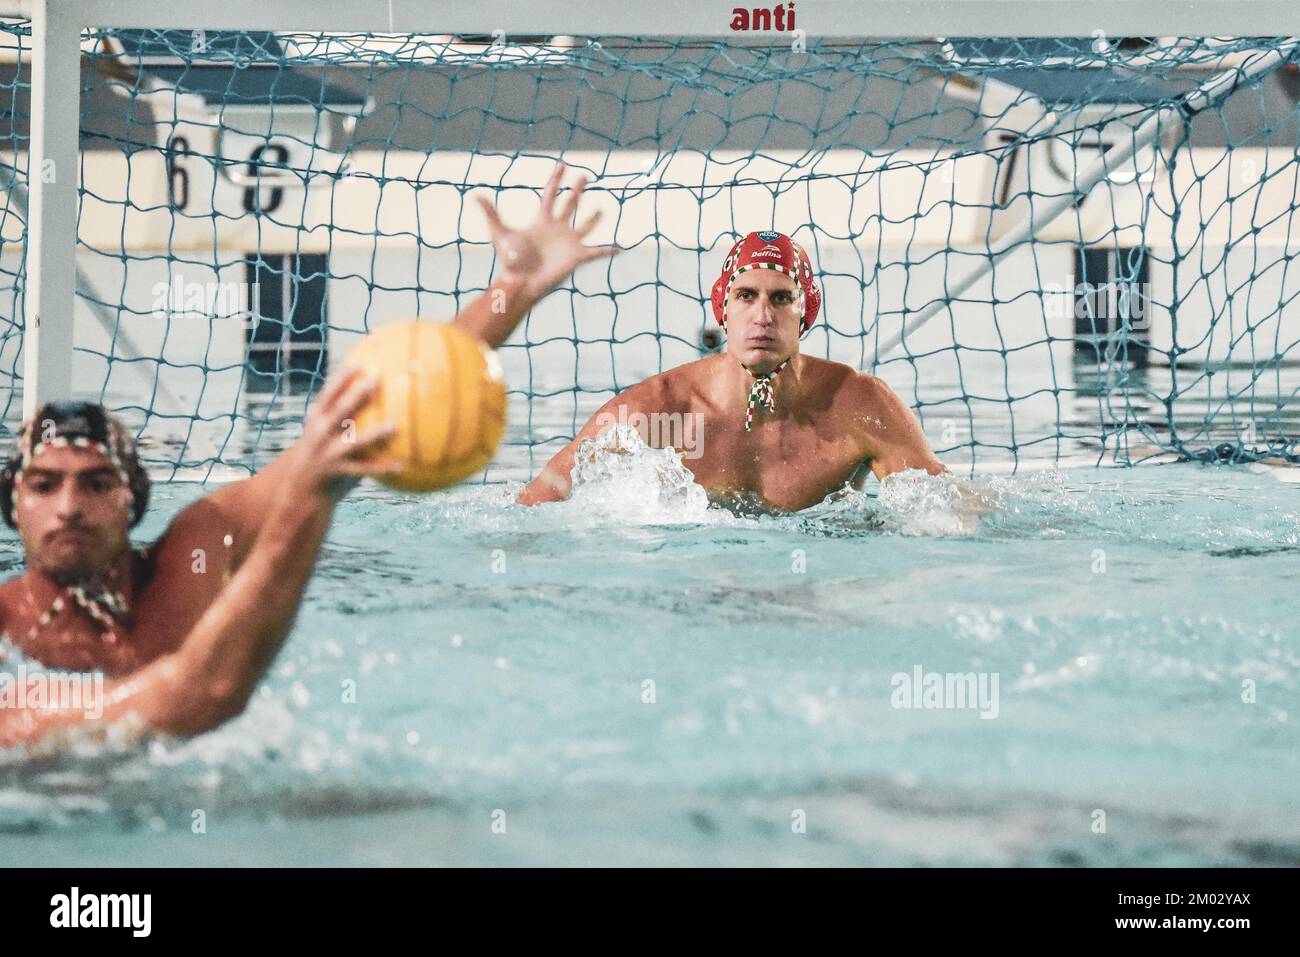 Anzio, Italy. 03rd Dec, 2022. Negri(Pro Recco) during Anzio Waterpolis vs Pro Recco, Waterpolo Italian Serie A match in Anzio, Italy, December 03 2022 Credit: Independent Photo Agency/Alamy Live News Stock Photo